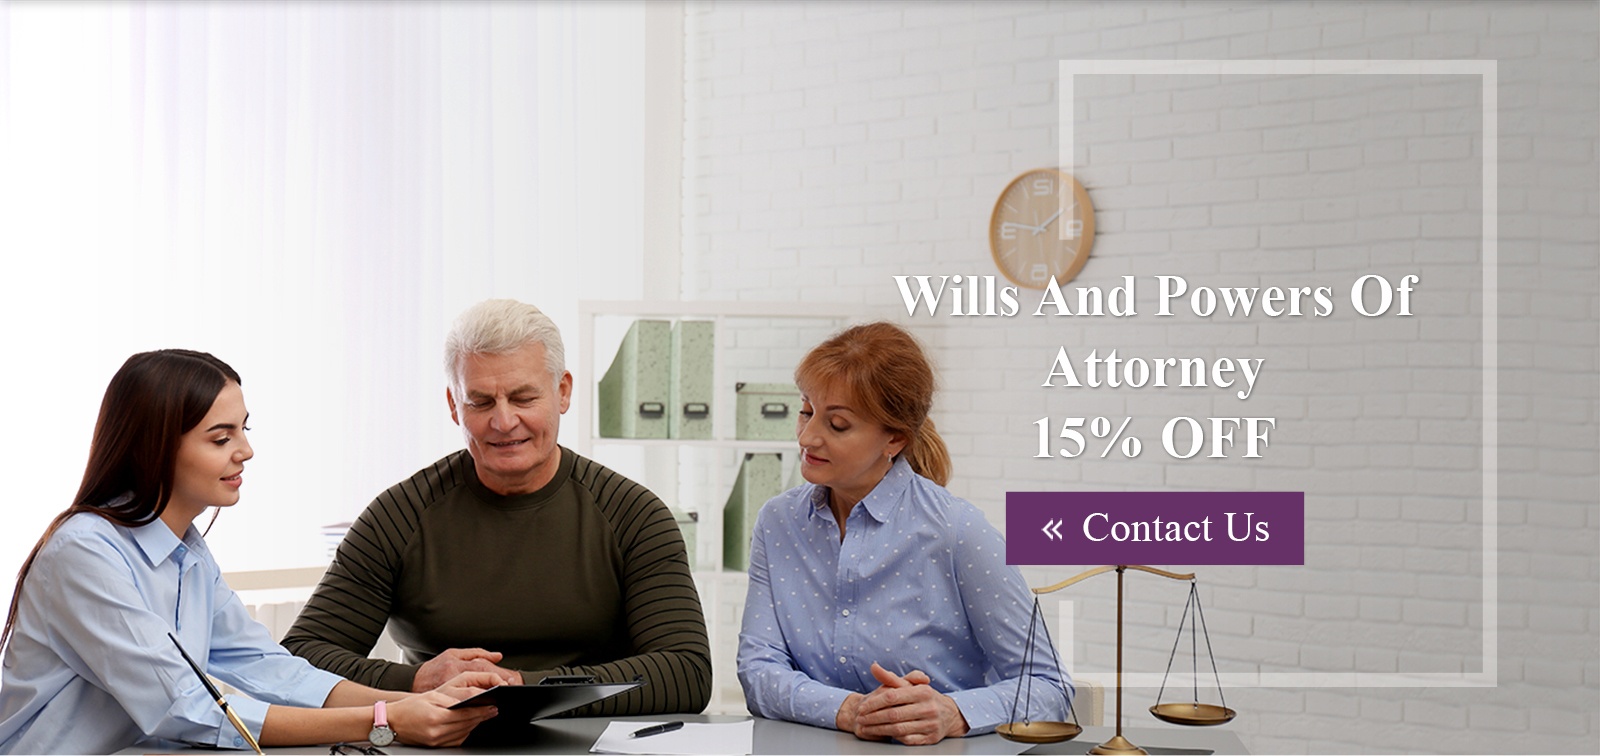 Wills And Powers of Attorney